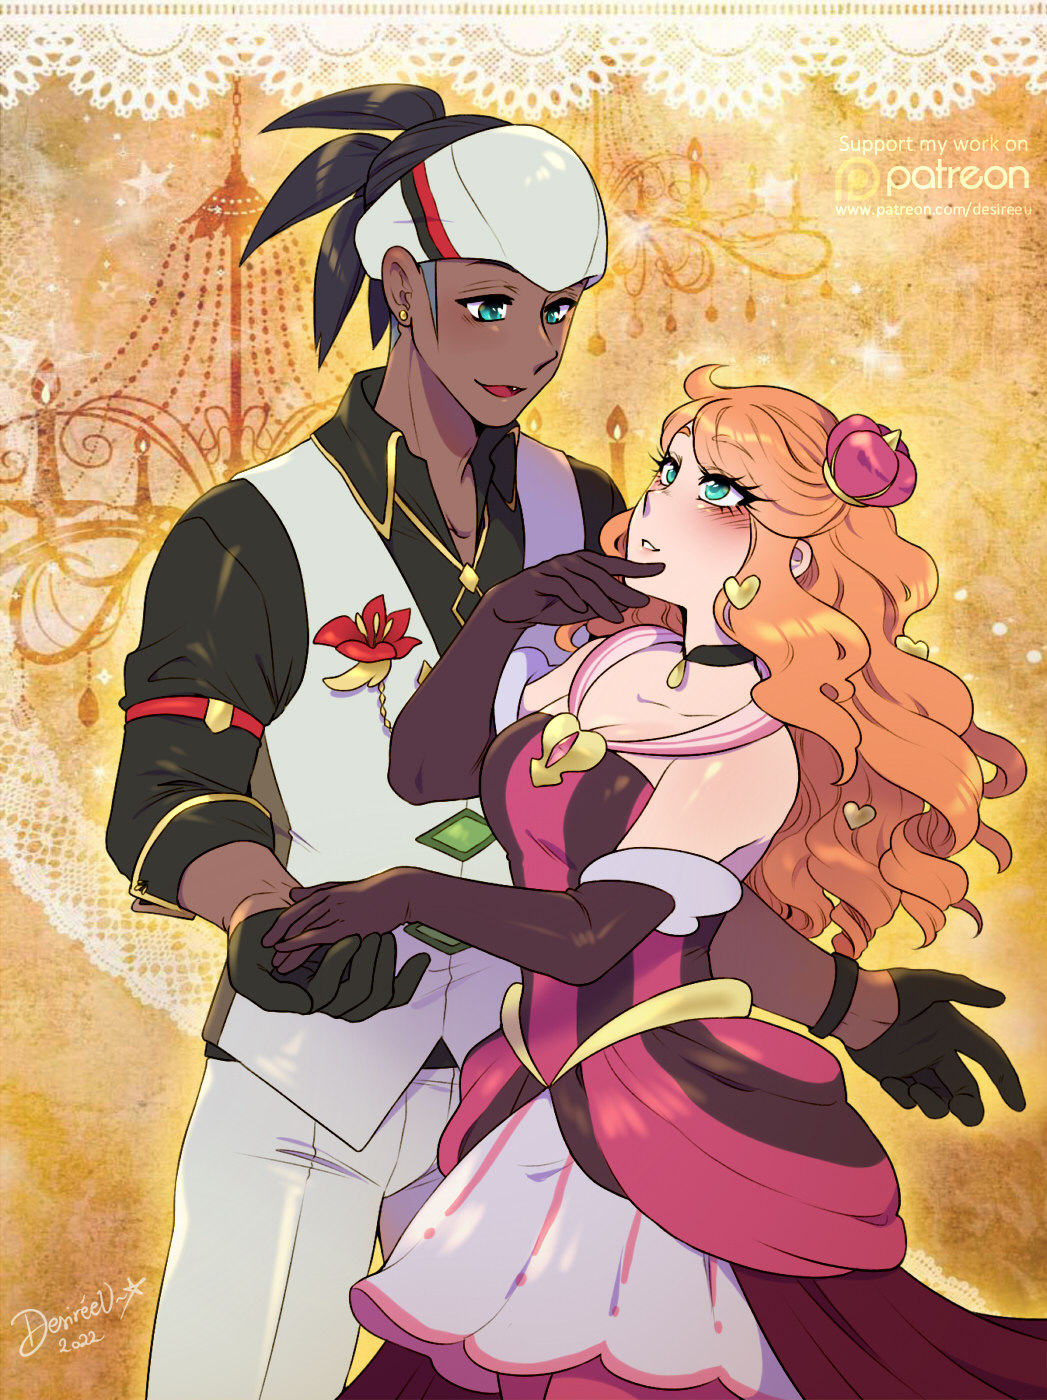 heyyyy, haven’t posted in a hot second, but a new alt for Sonia leaked from Pokemon Masters so here I am, sobbing over my (now equally fancy) ship 😭